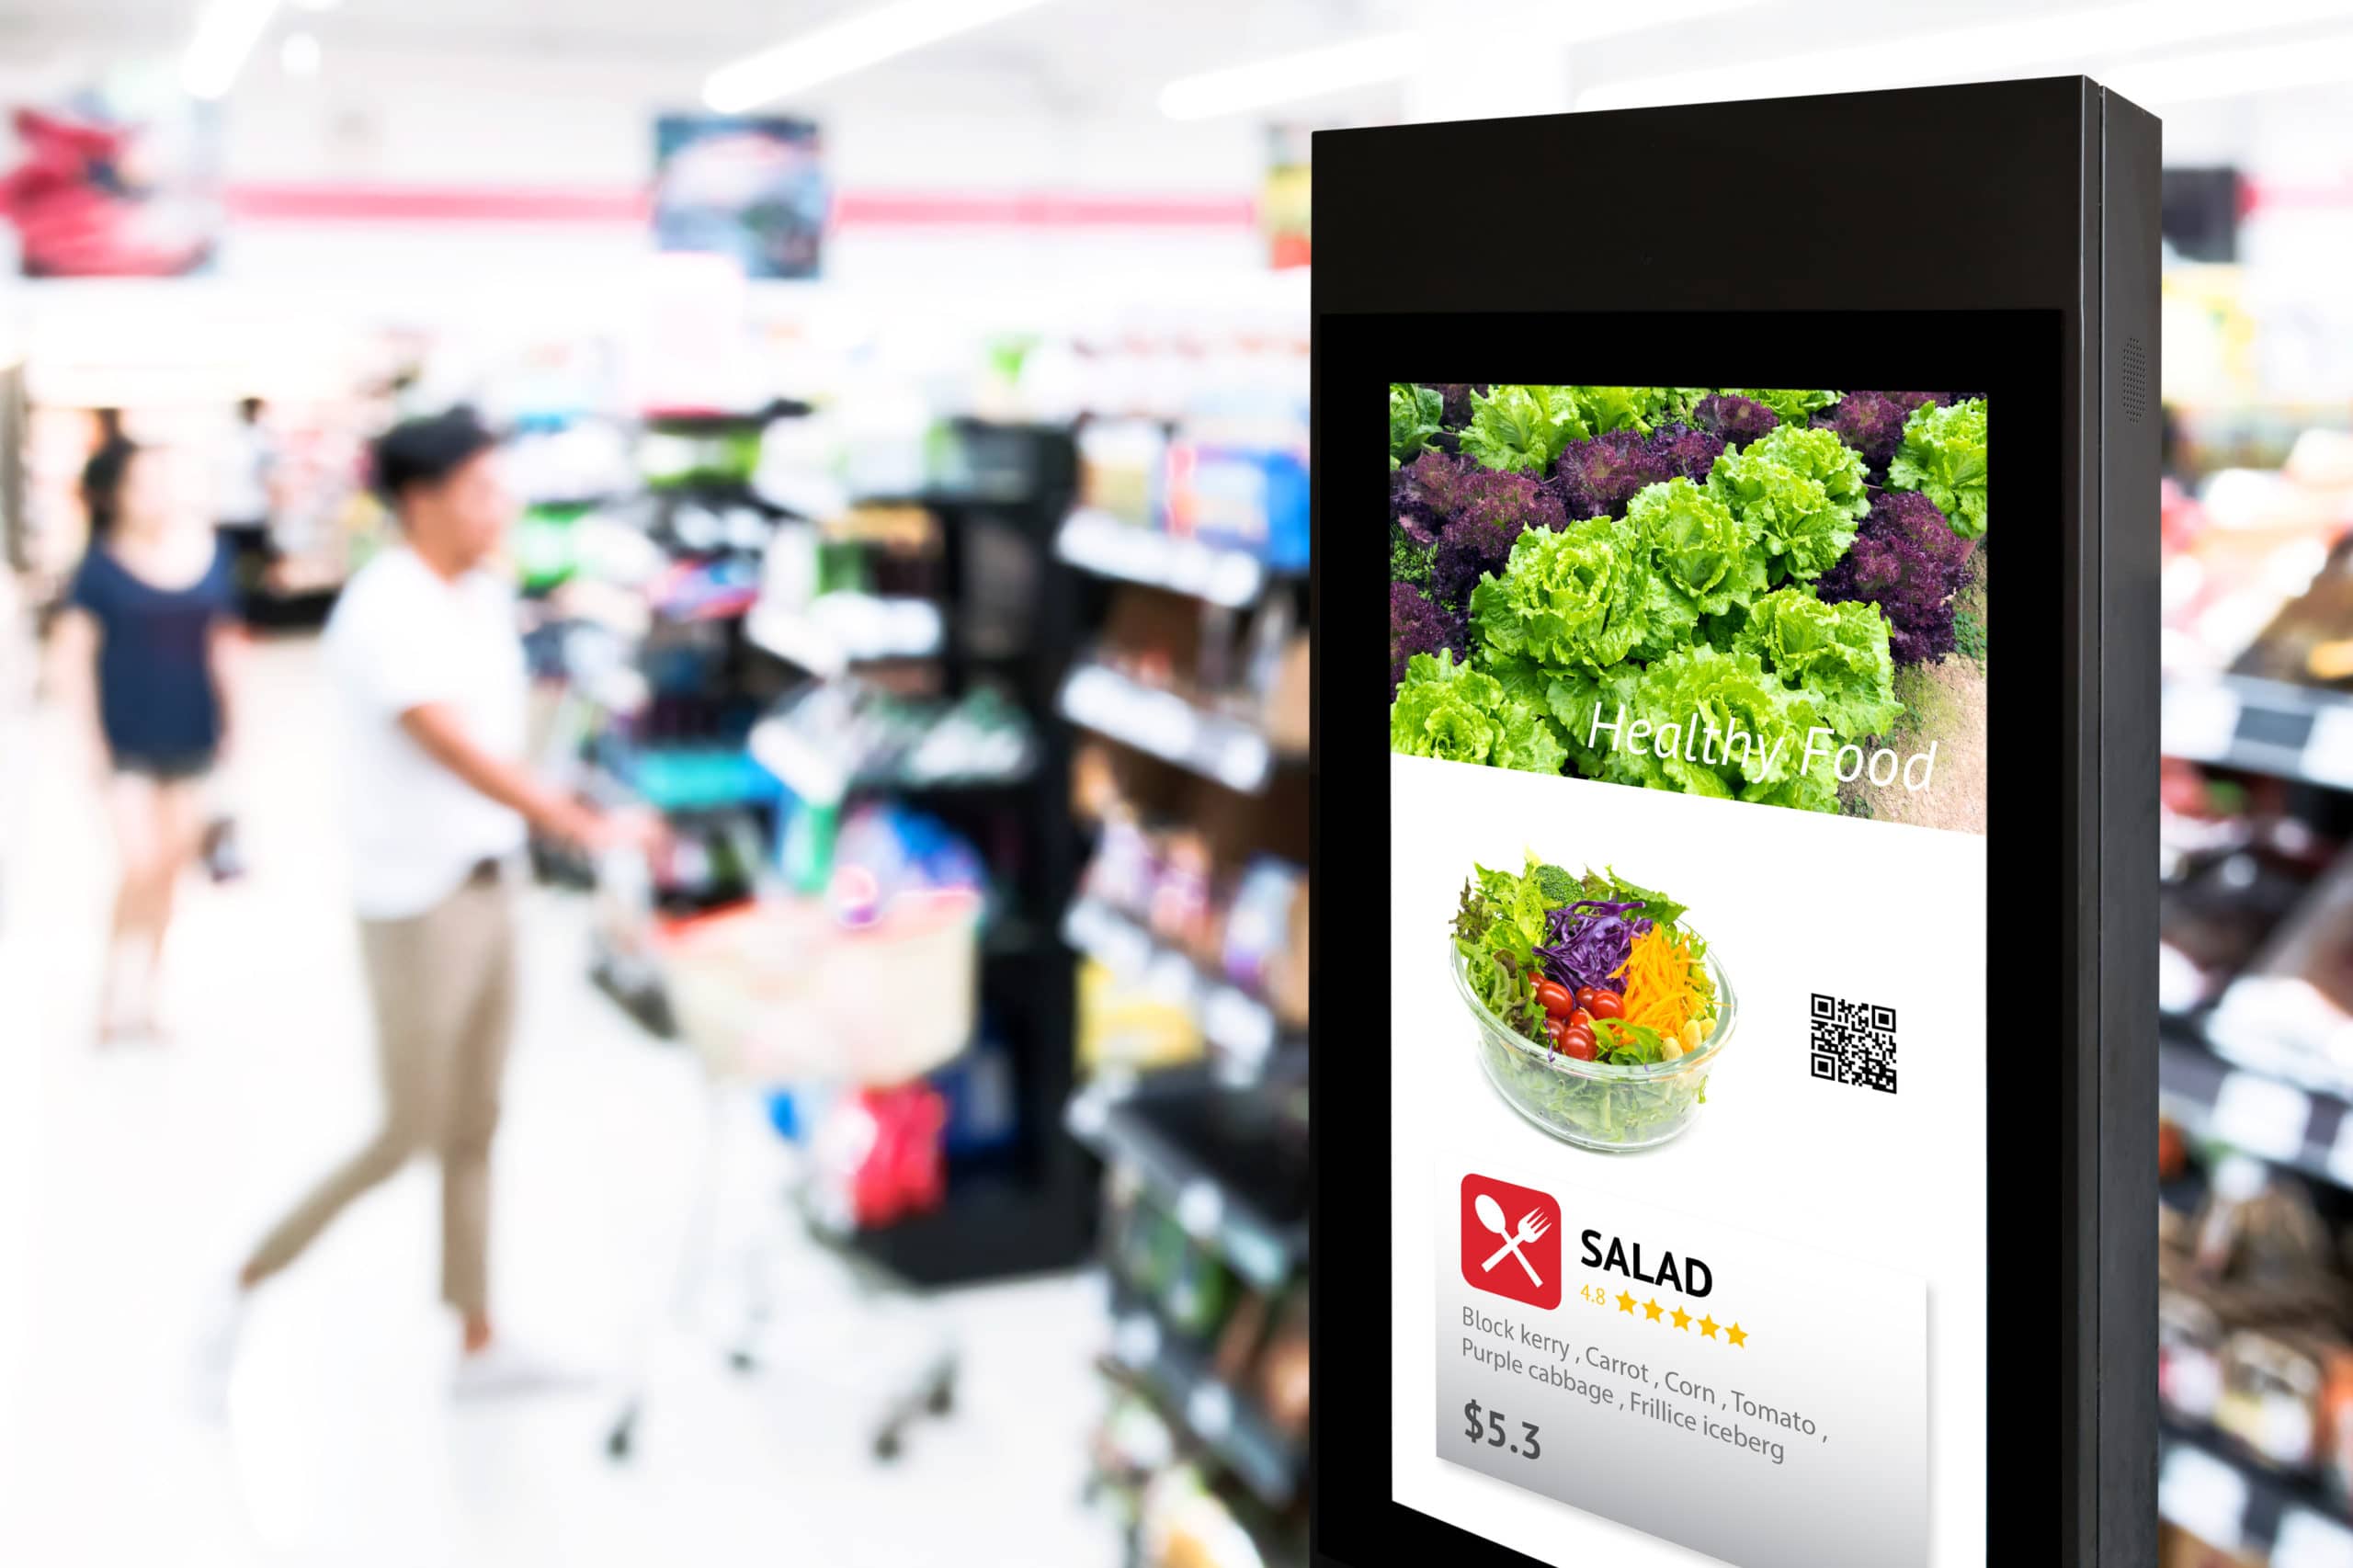 A retail image recognition strategy that CPG brands should be using